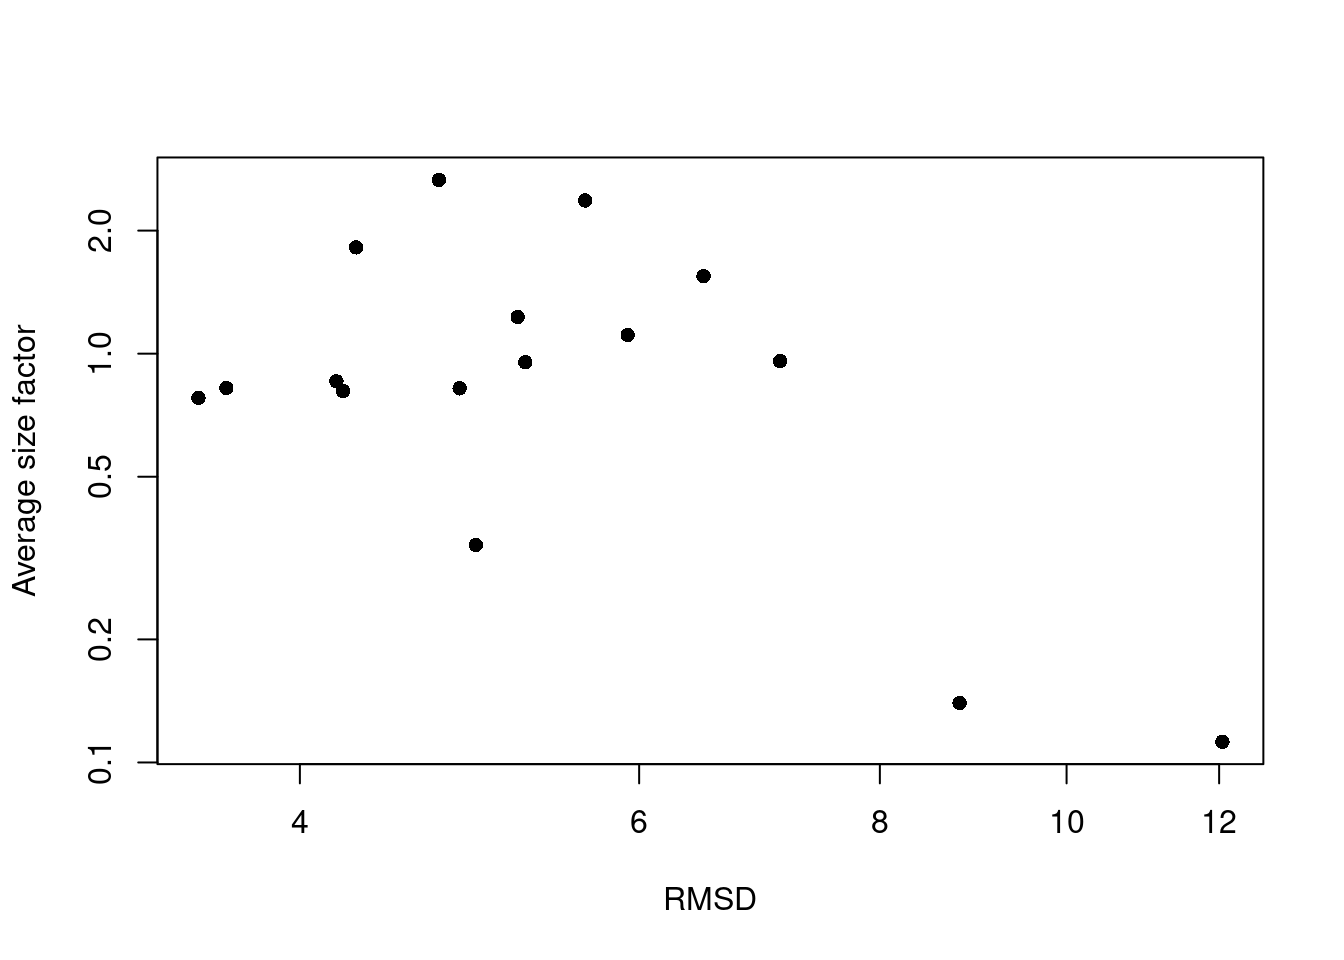 RMSDs for each cluster in the PBMC dataset as a function of the average size factor.